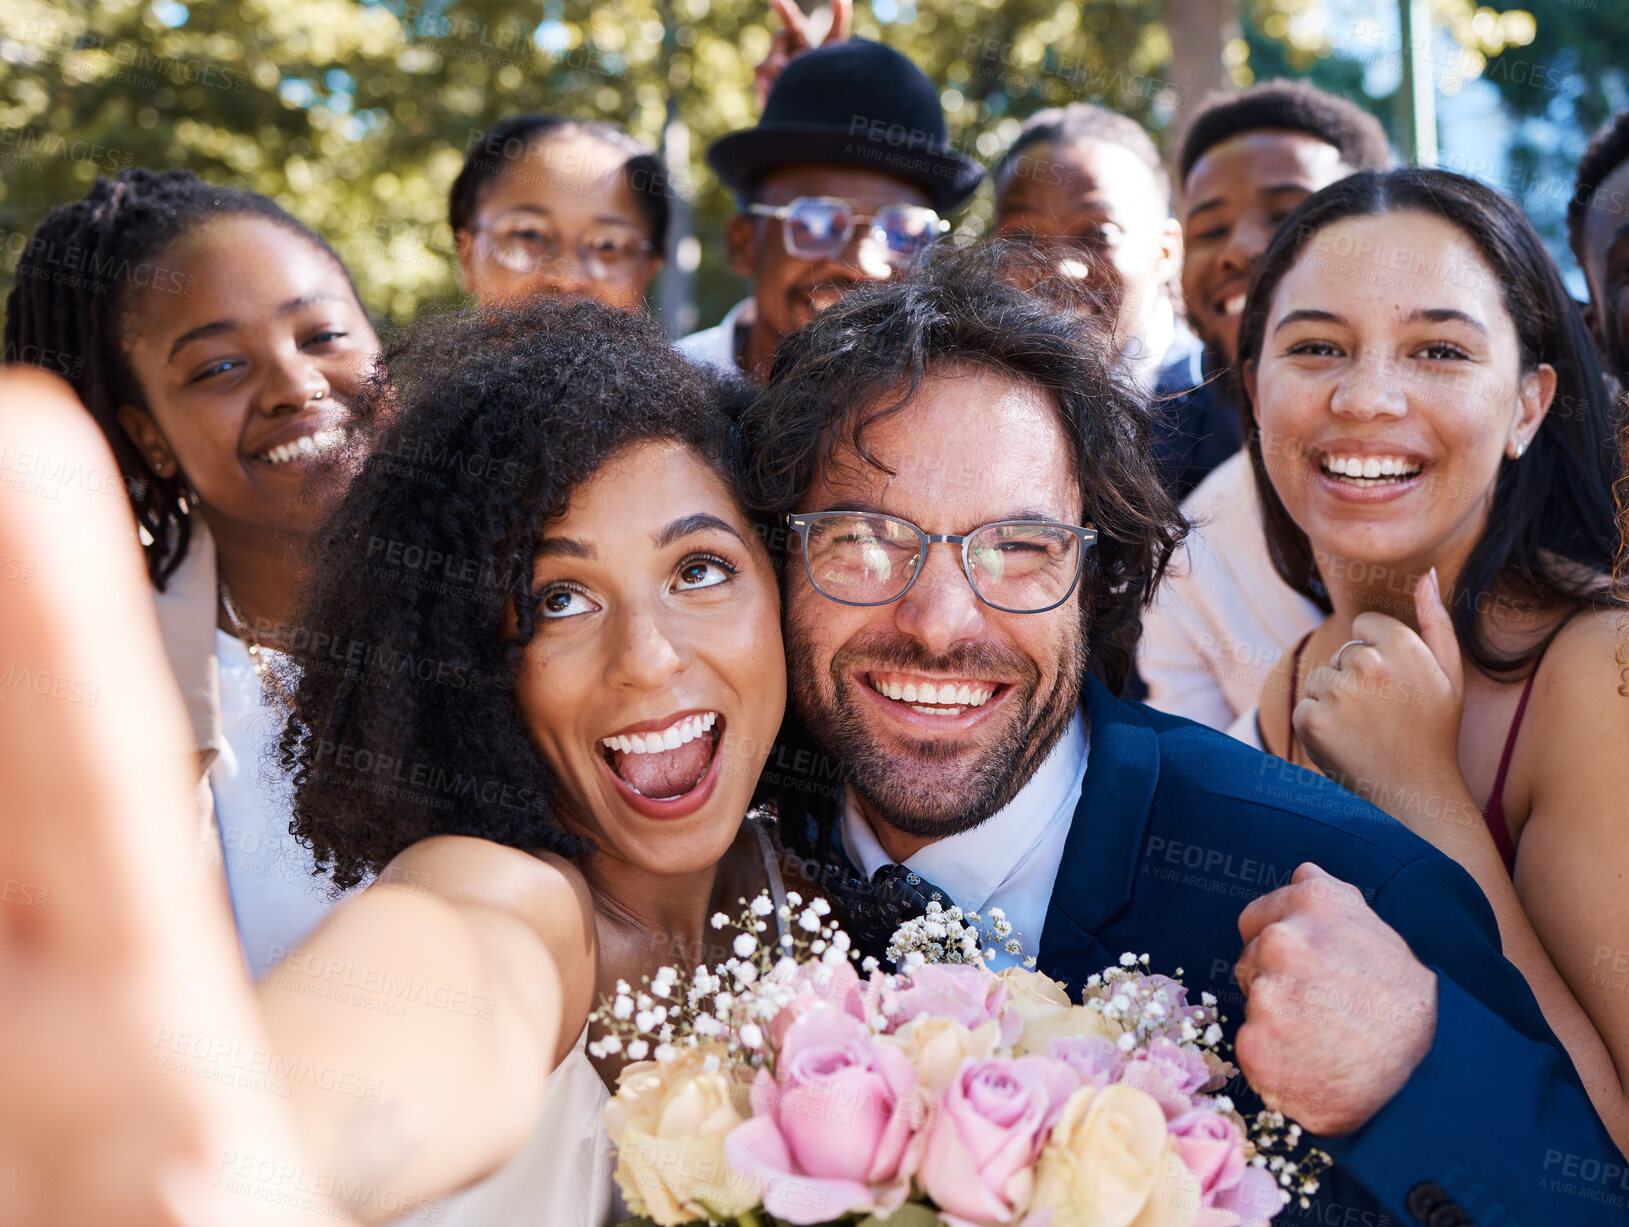 Buy stock photo Friends, bride and groom with wedding selfie for outdoor ceremony celebration of happiness, love and joy. Marriage, happy and interracial relationship photograph of togetherness with excited guests

